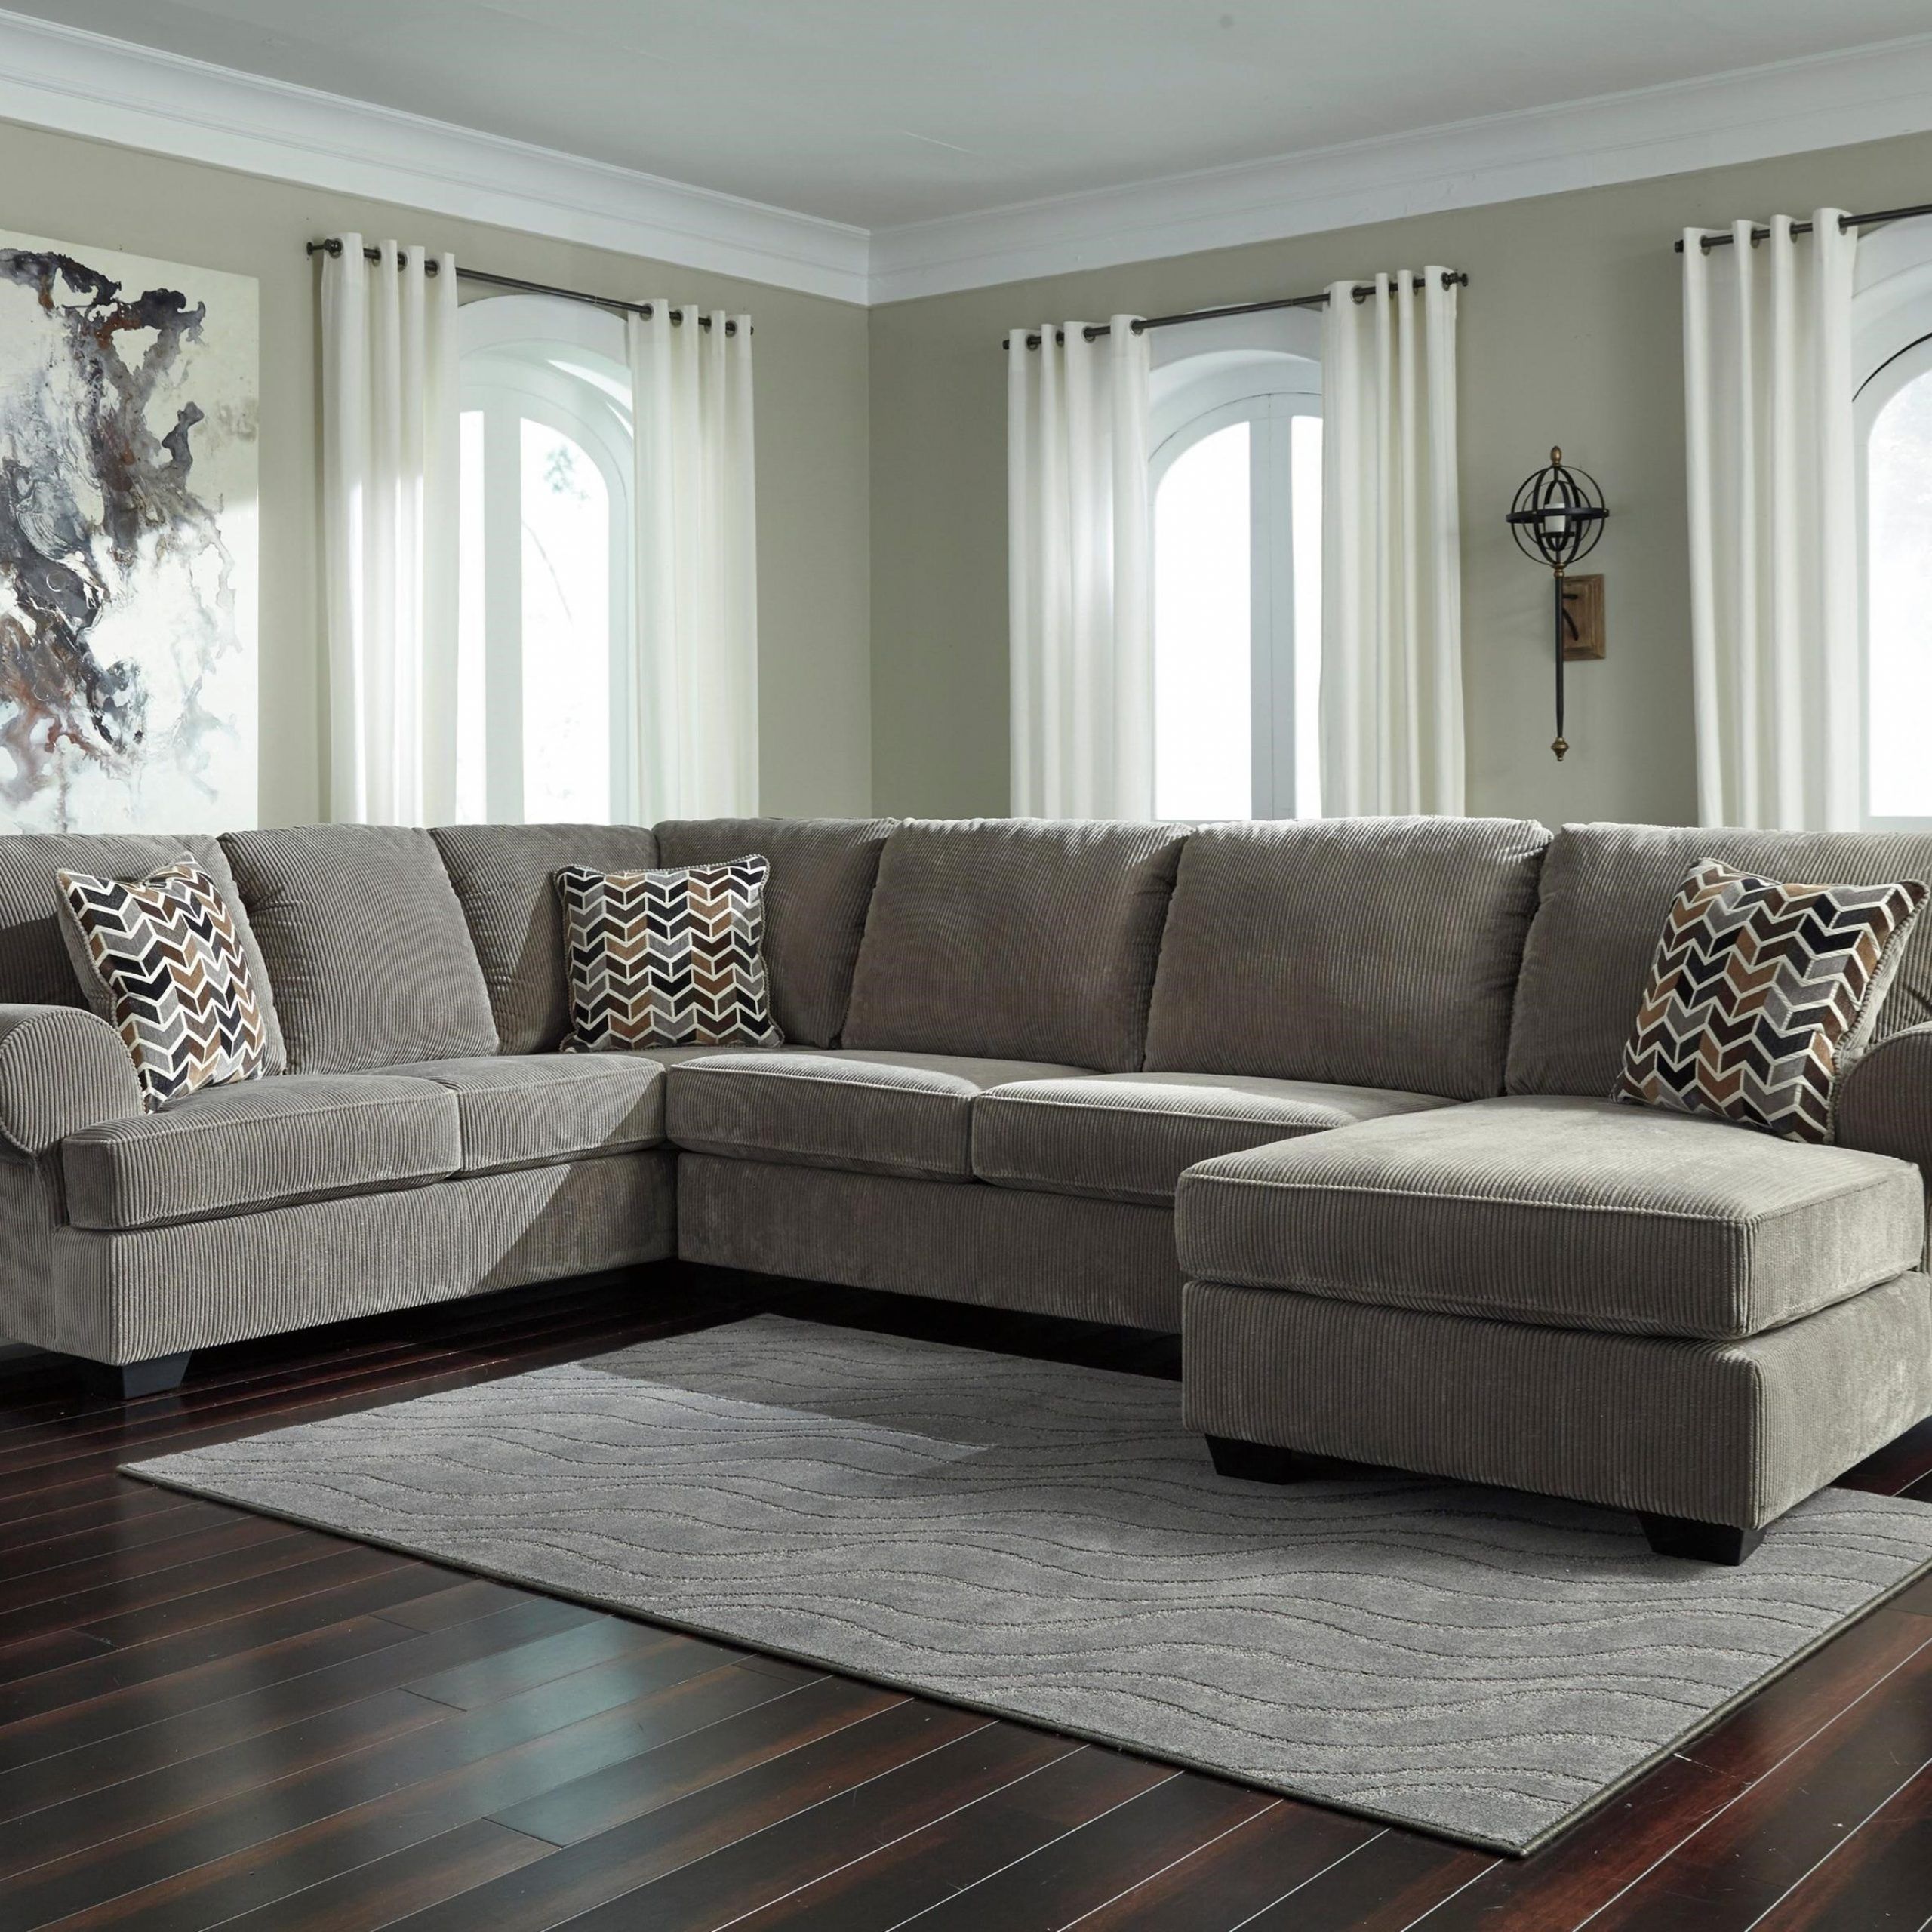 Ashley Signature Design Jinllingsly Contemporary 3 Piece Intended For 3pc Miles Leather Sectional Sofas With Chaise (View 12 of 15)